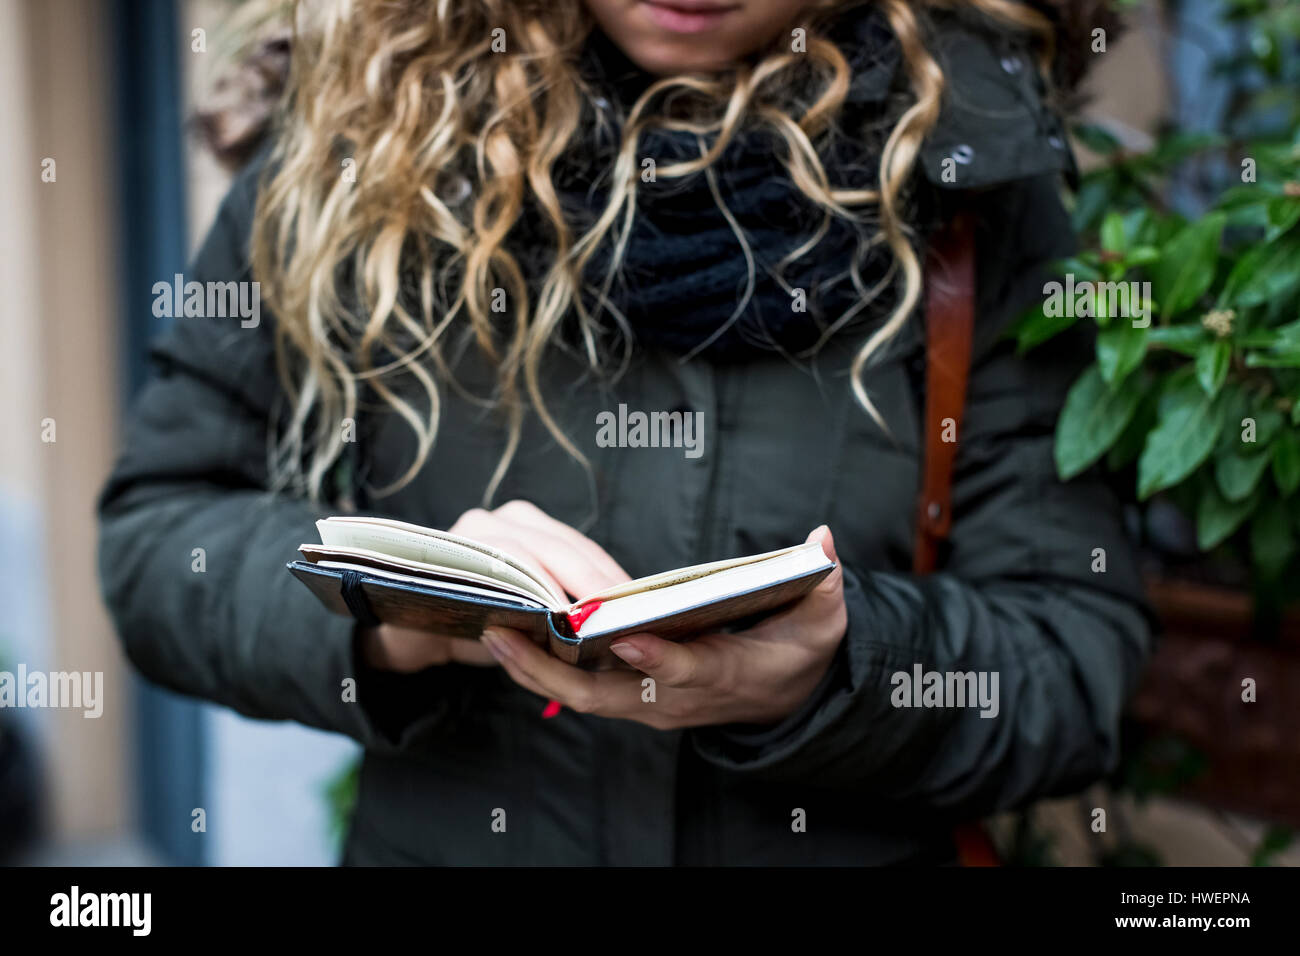 Cropped view of woman reading book, Milan, Italy Stock Photo